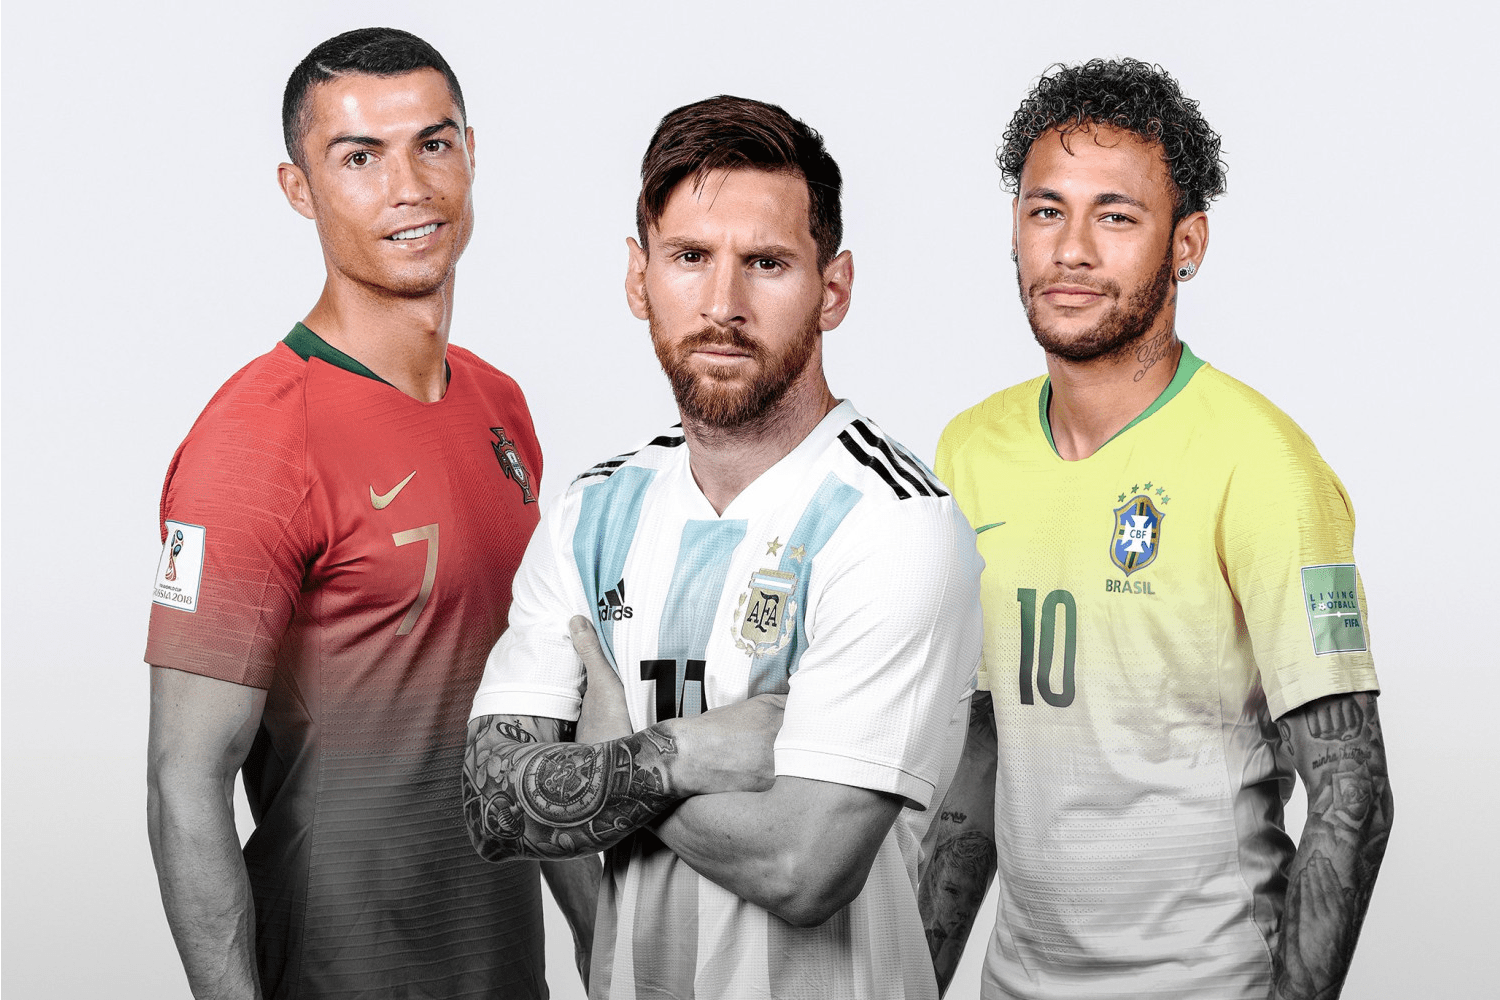 QUIZ: Ronaldo? Messi? Neymar? Mbappe? Find out which star you are - ESPN